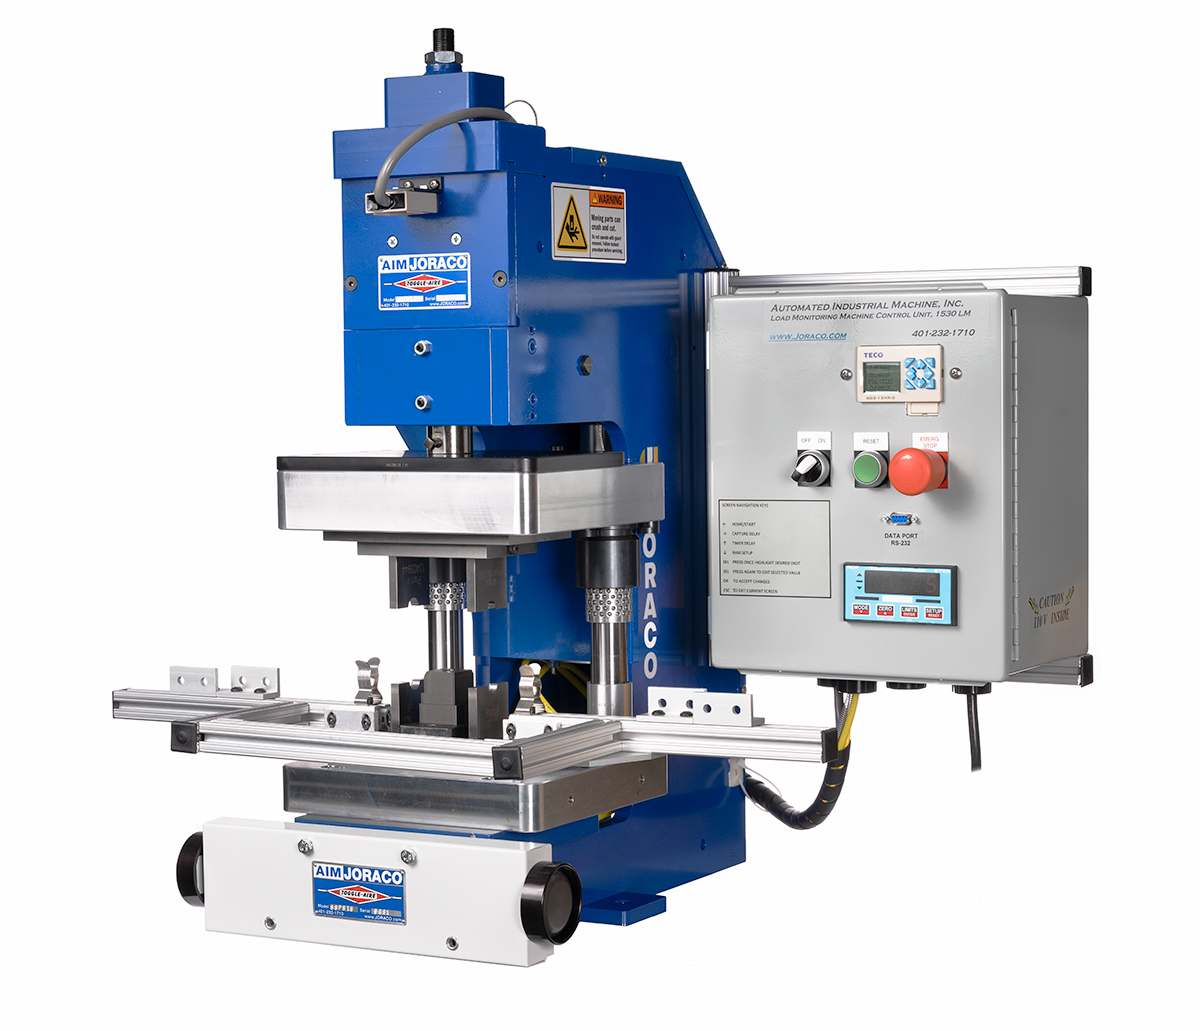 TOGGLE-AIRE® Series Model 1530 with Force Monitoring and Custom Dimensions (Shown with Die Set, Tooling, and Fixtures)